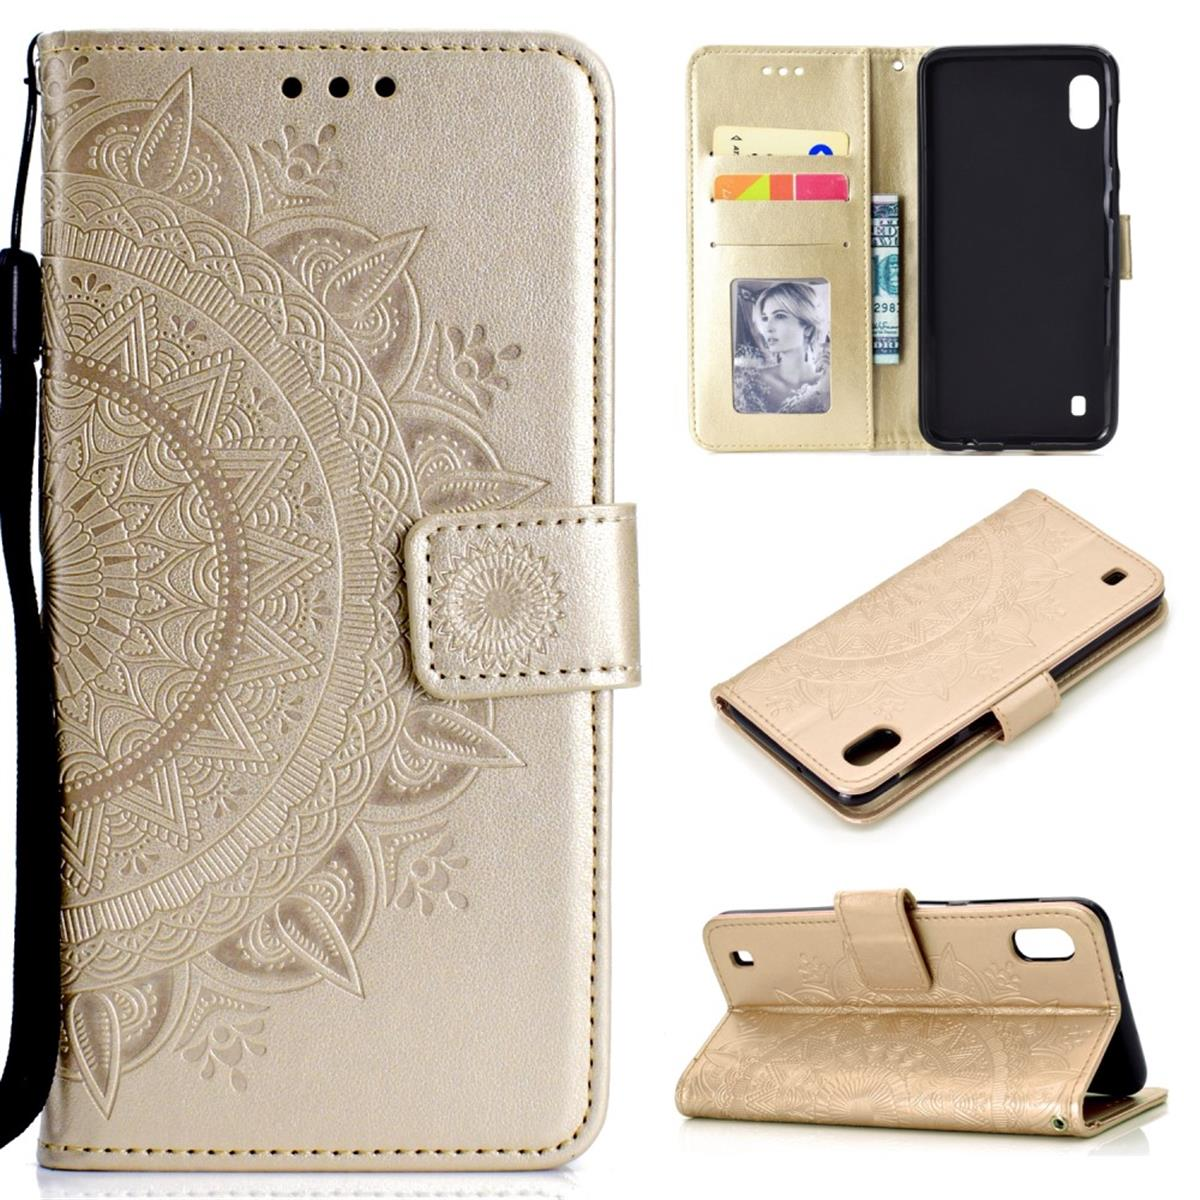 COVERKINGZ Klapphülle mit Mandala Muster, Galaxy Gold Samsung, A10, Bookcover